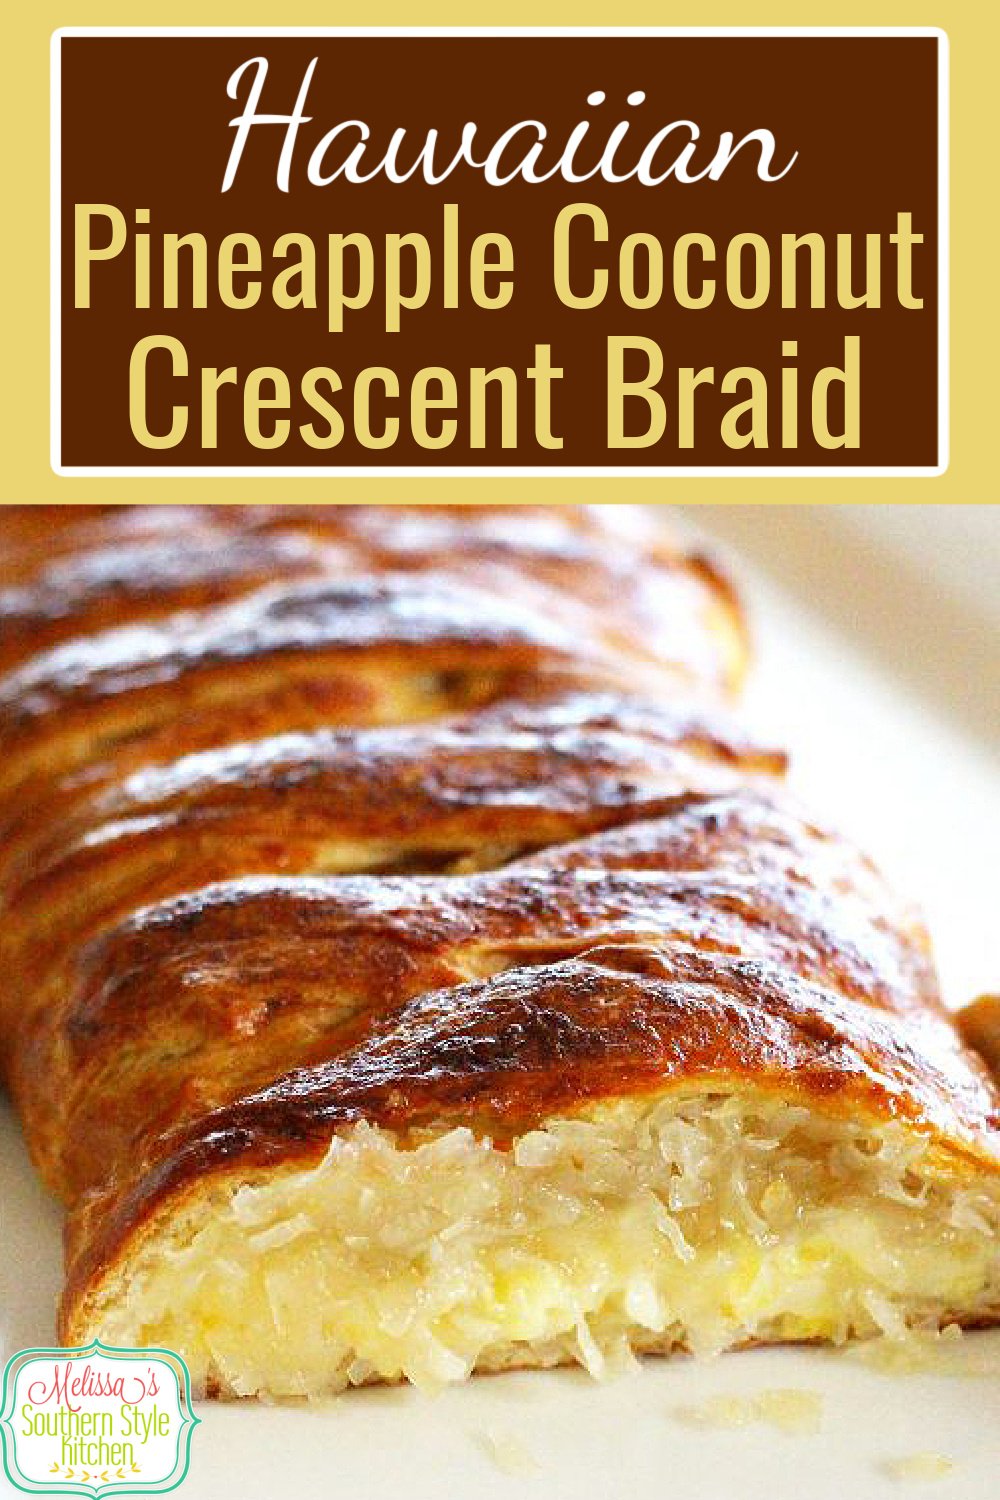 This Hawaiian Pineapple Coconut Crescent Braid features a decadent cream cheese filling filled with sweet coconut and crushed pineapple #hawaiiancrescentbraid #pineapplecoconut #crescentrollrecipes #brunch #breakfast #pineappledesserts #coconutdesserts #dessertrecipes #holidaybrunch via @melissasssk